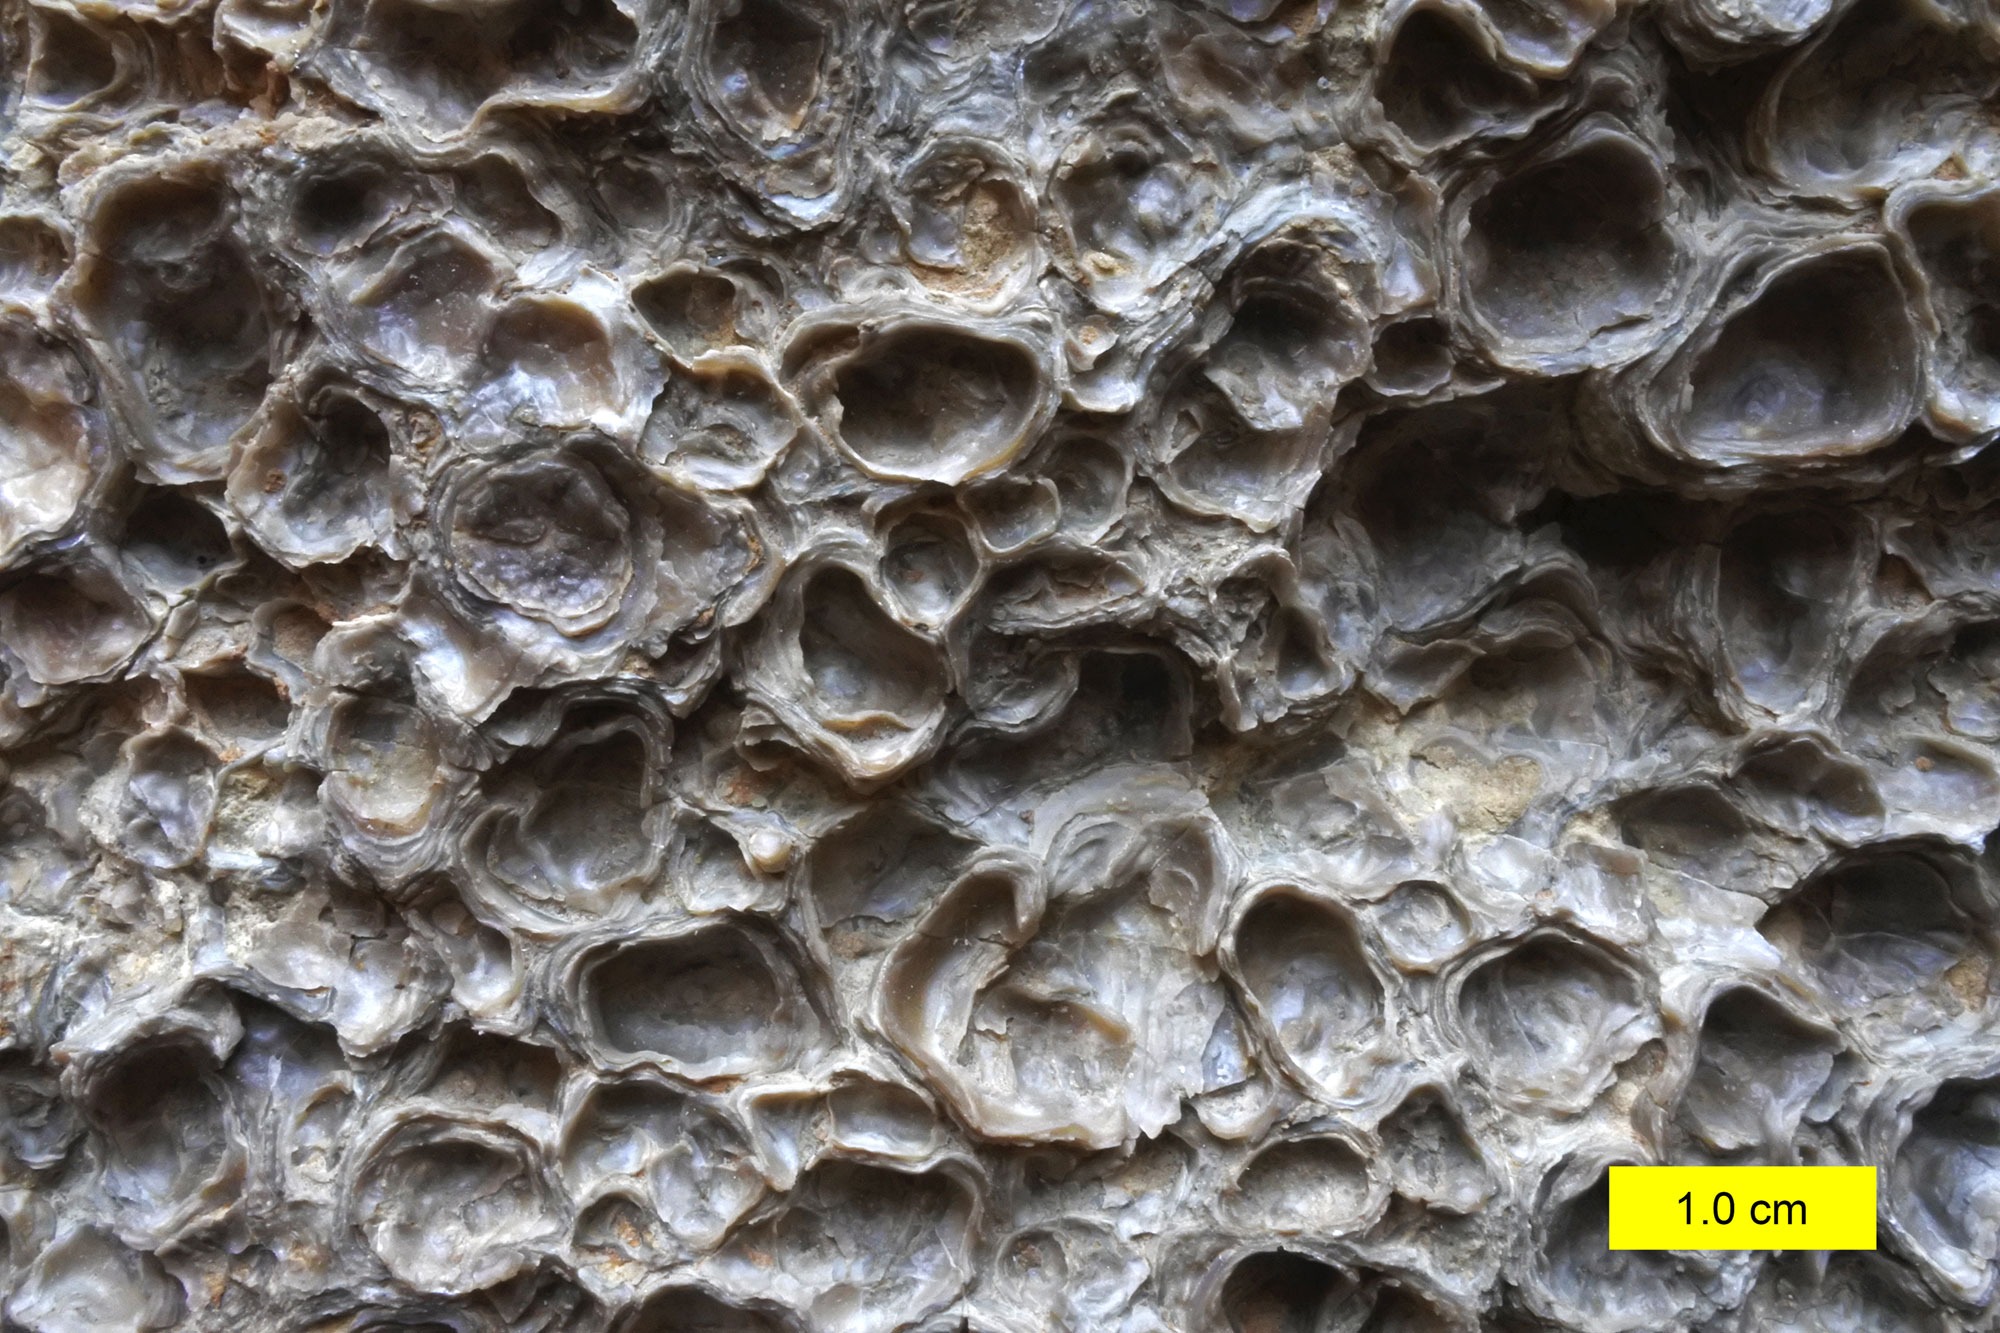 Photograph of a crowded cluster of small oysters from the Jurassic of Utah. The oysters look like depressions with raised rims. They are grayish in color. Scale bar in corner of photo is 1 centimeter (about the diameter of some of the individual oysters).